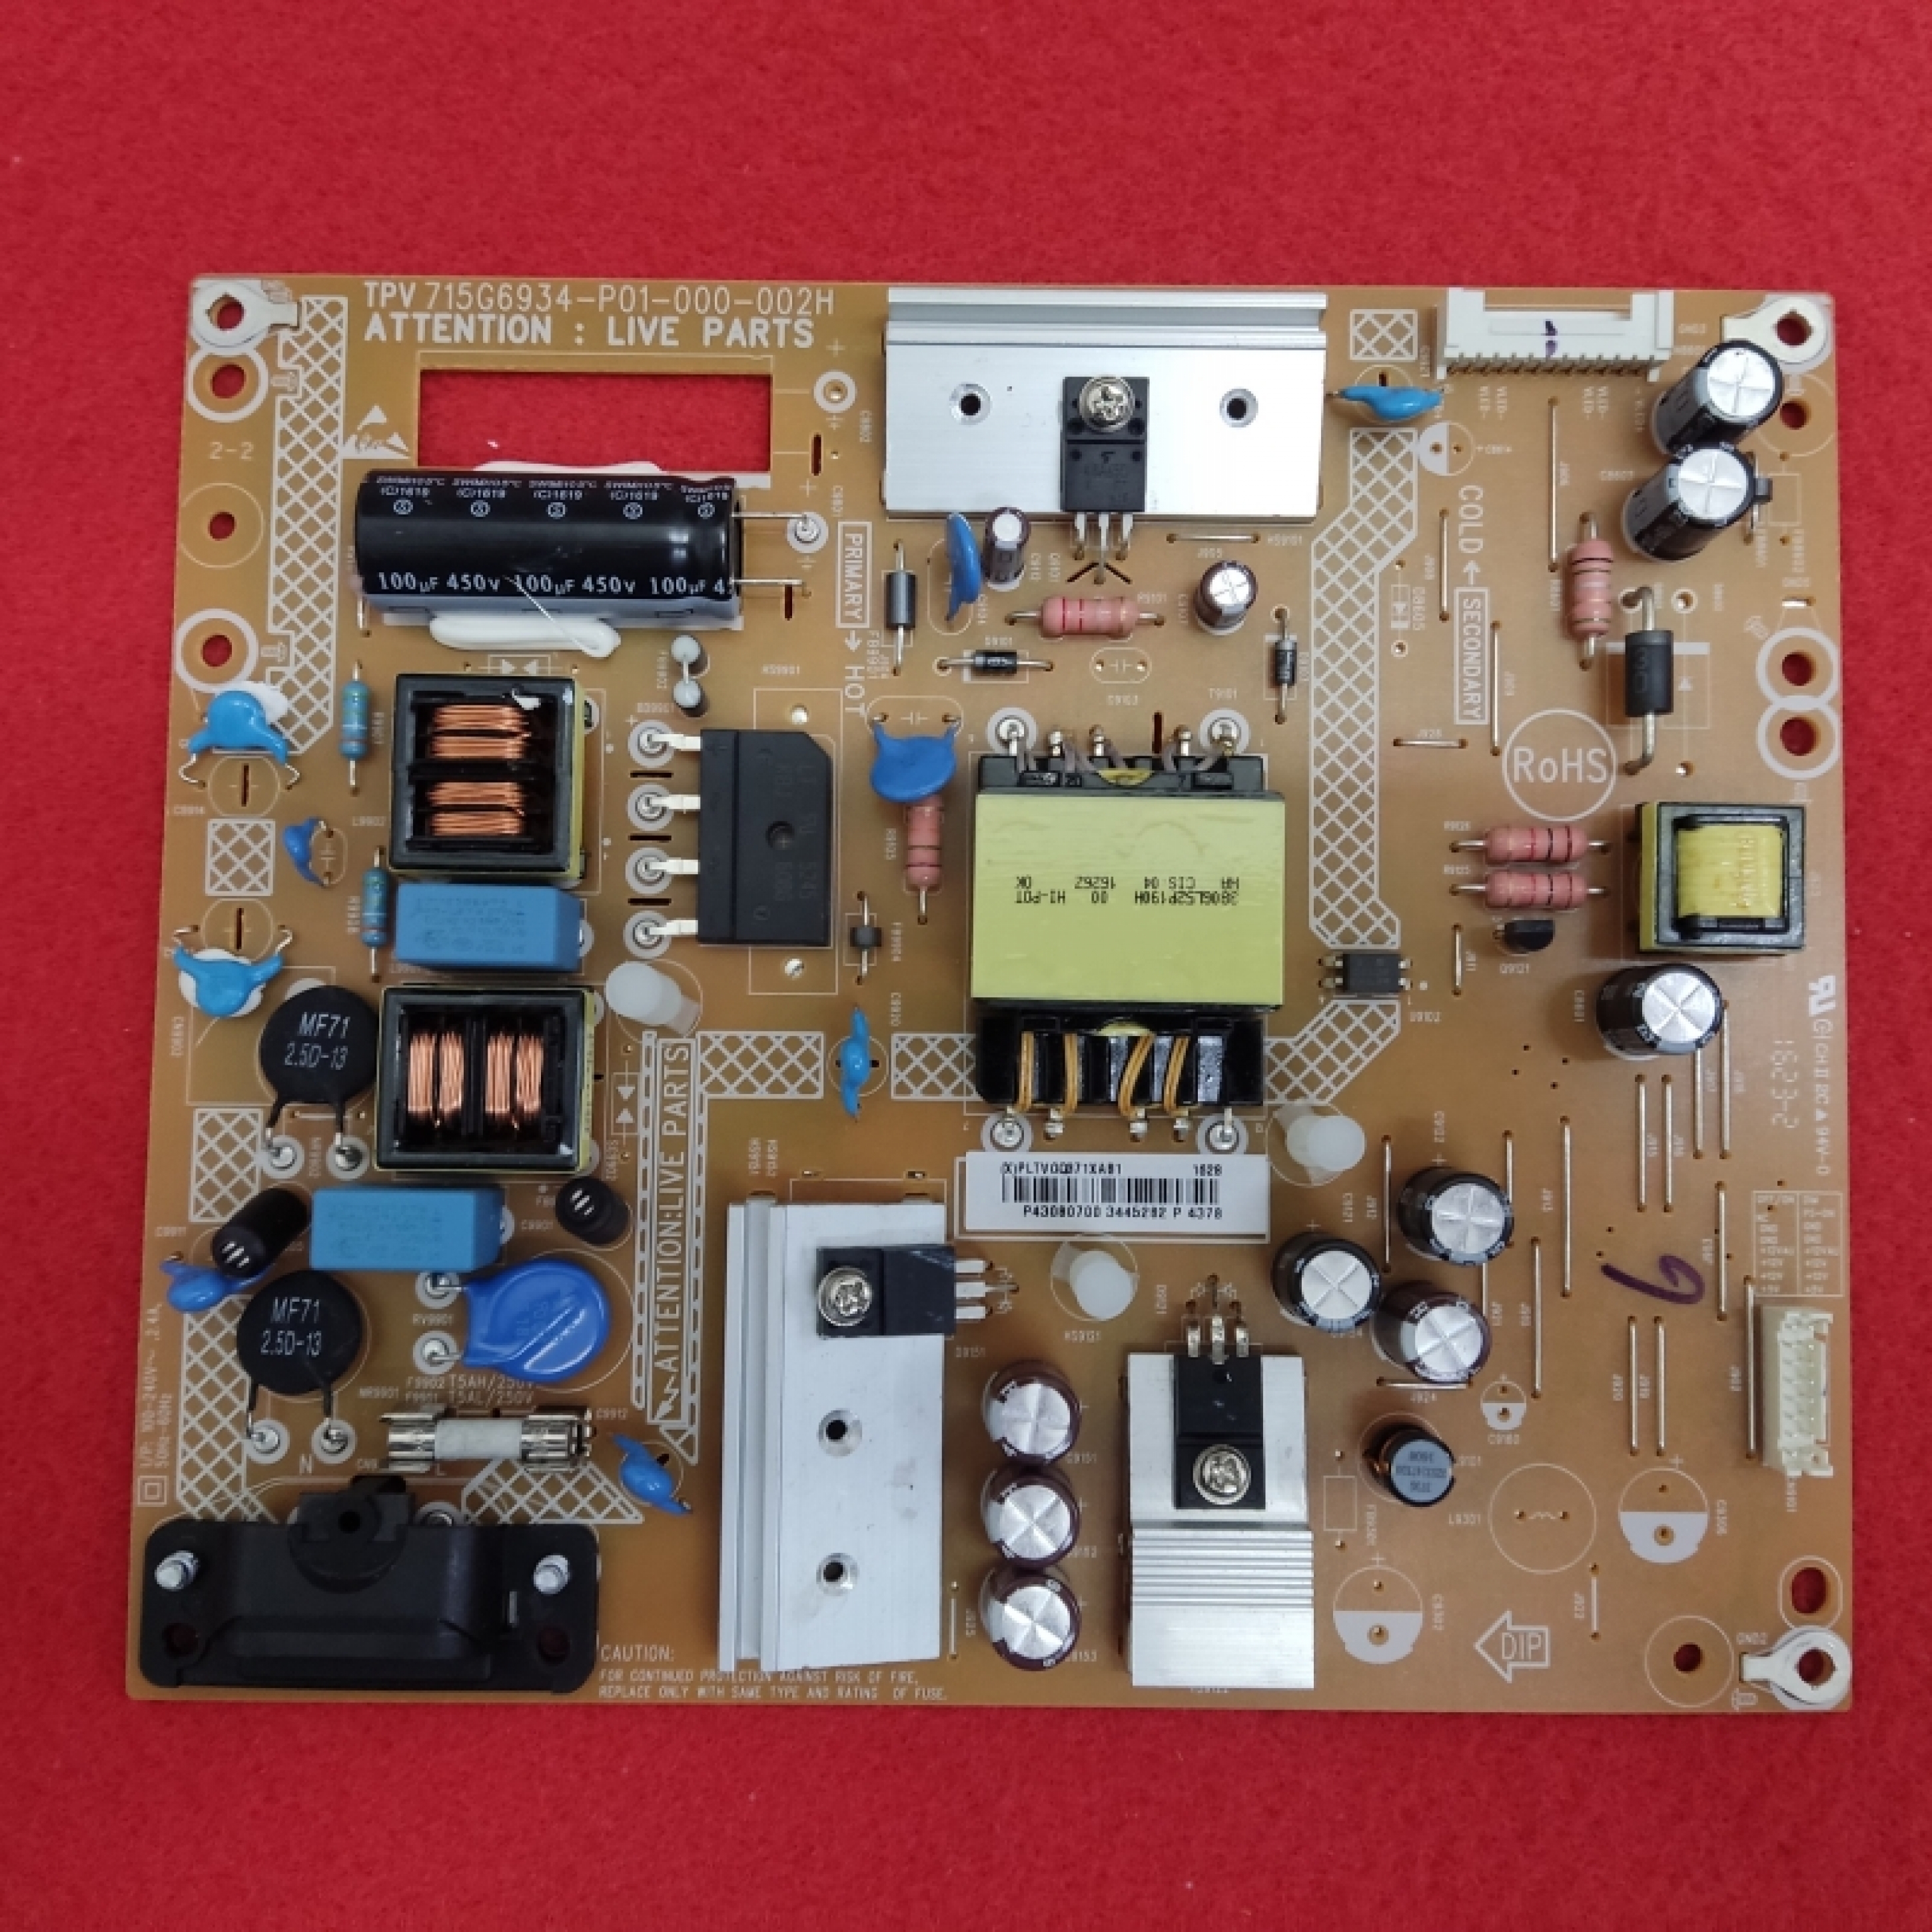 D25 - 715G6934-P01-000-002H POWER BOARD PHILIPS